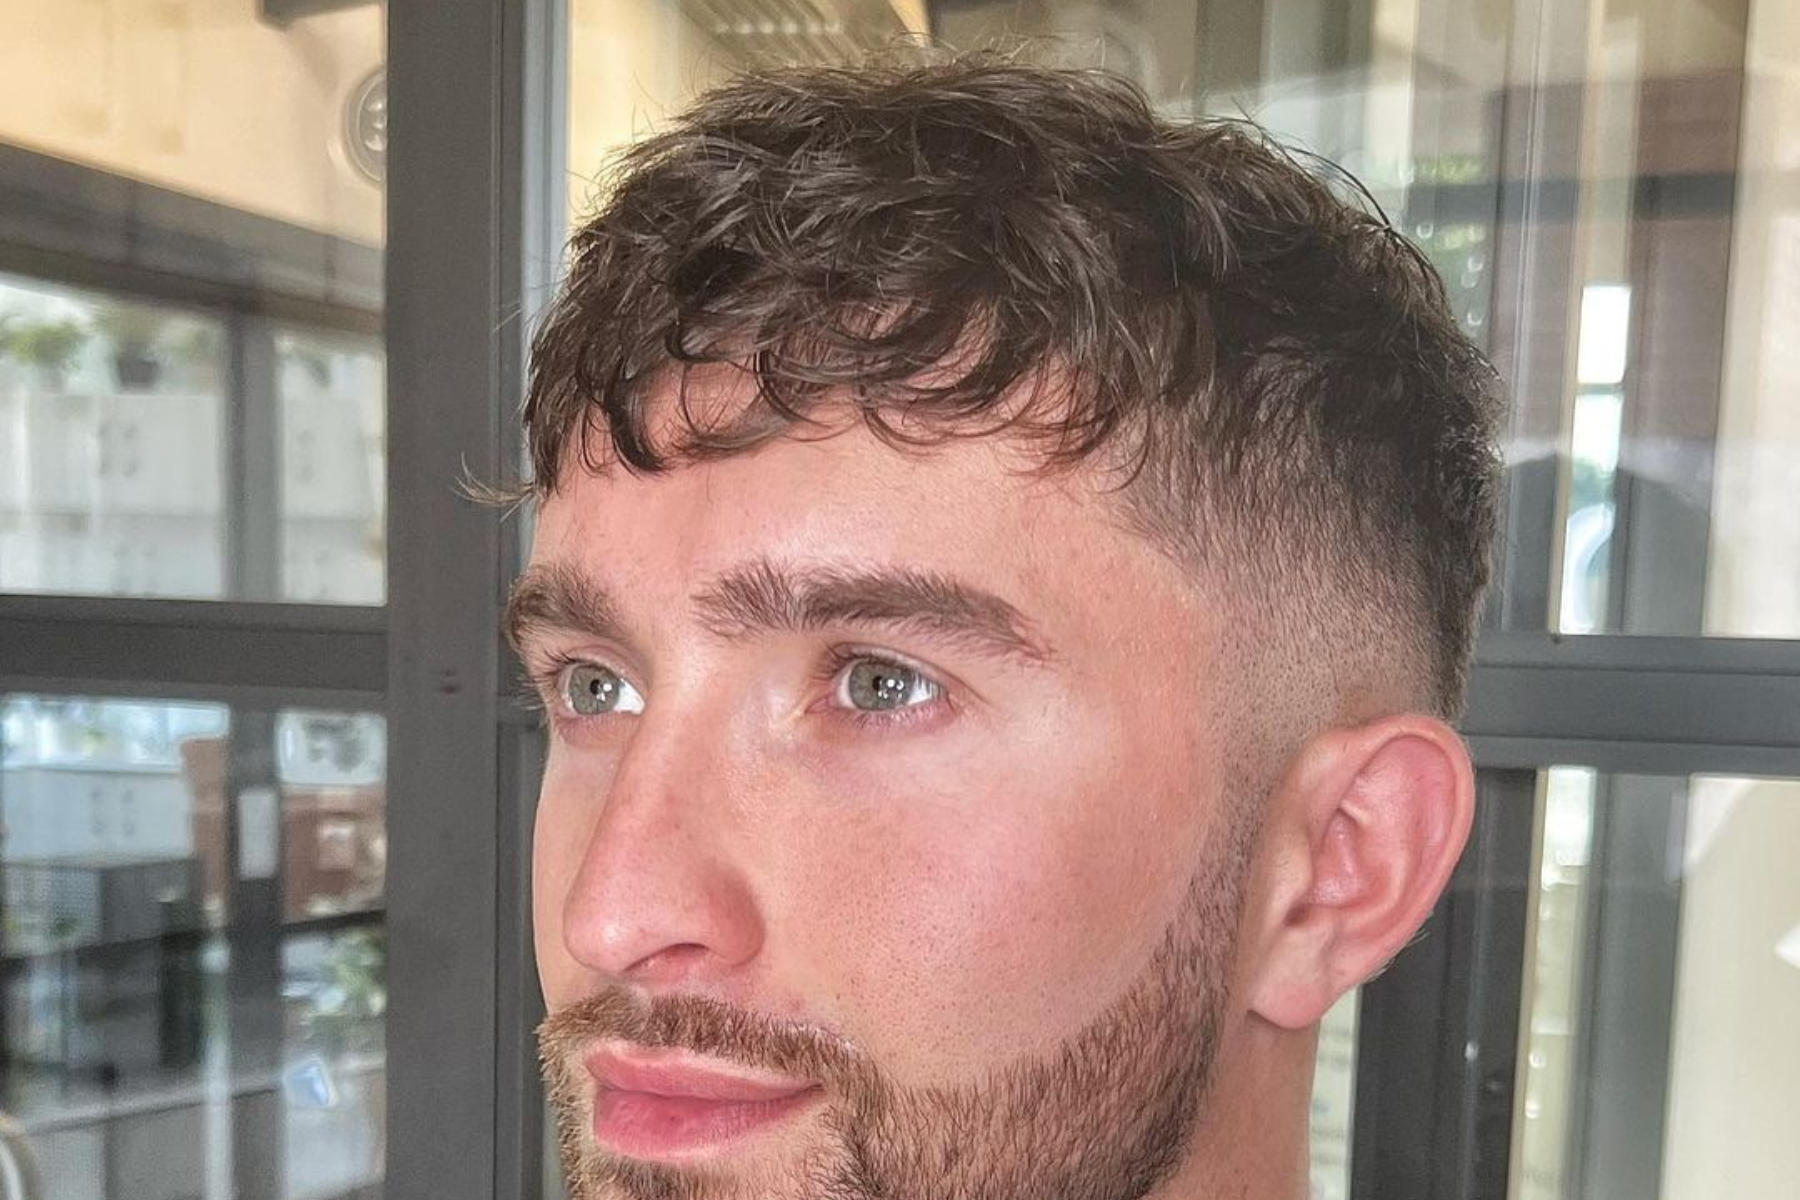 MEN'S HAIRSTYLES - DEALING WITH FRINGE AND FRAMING THE FACE